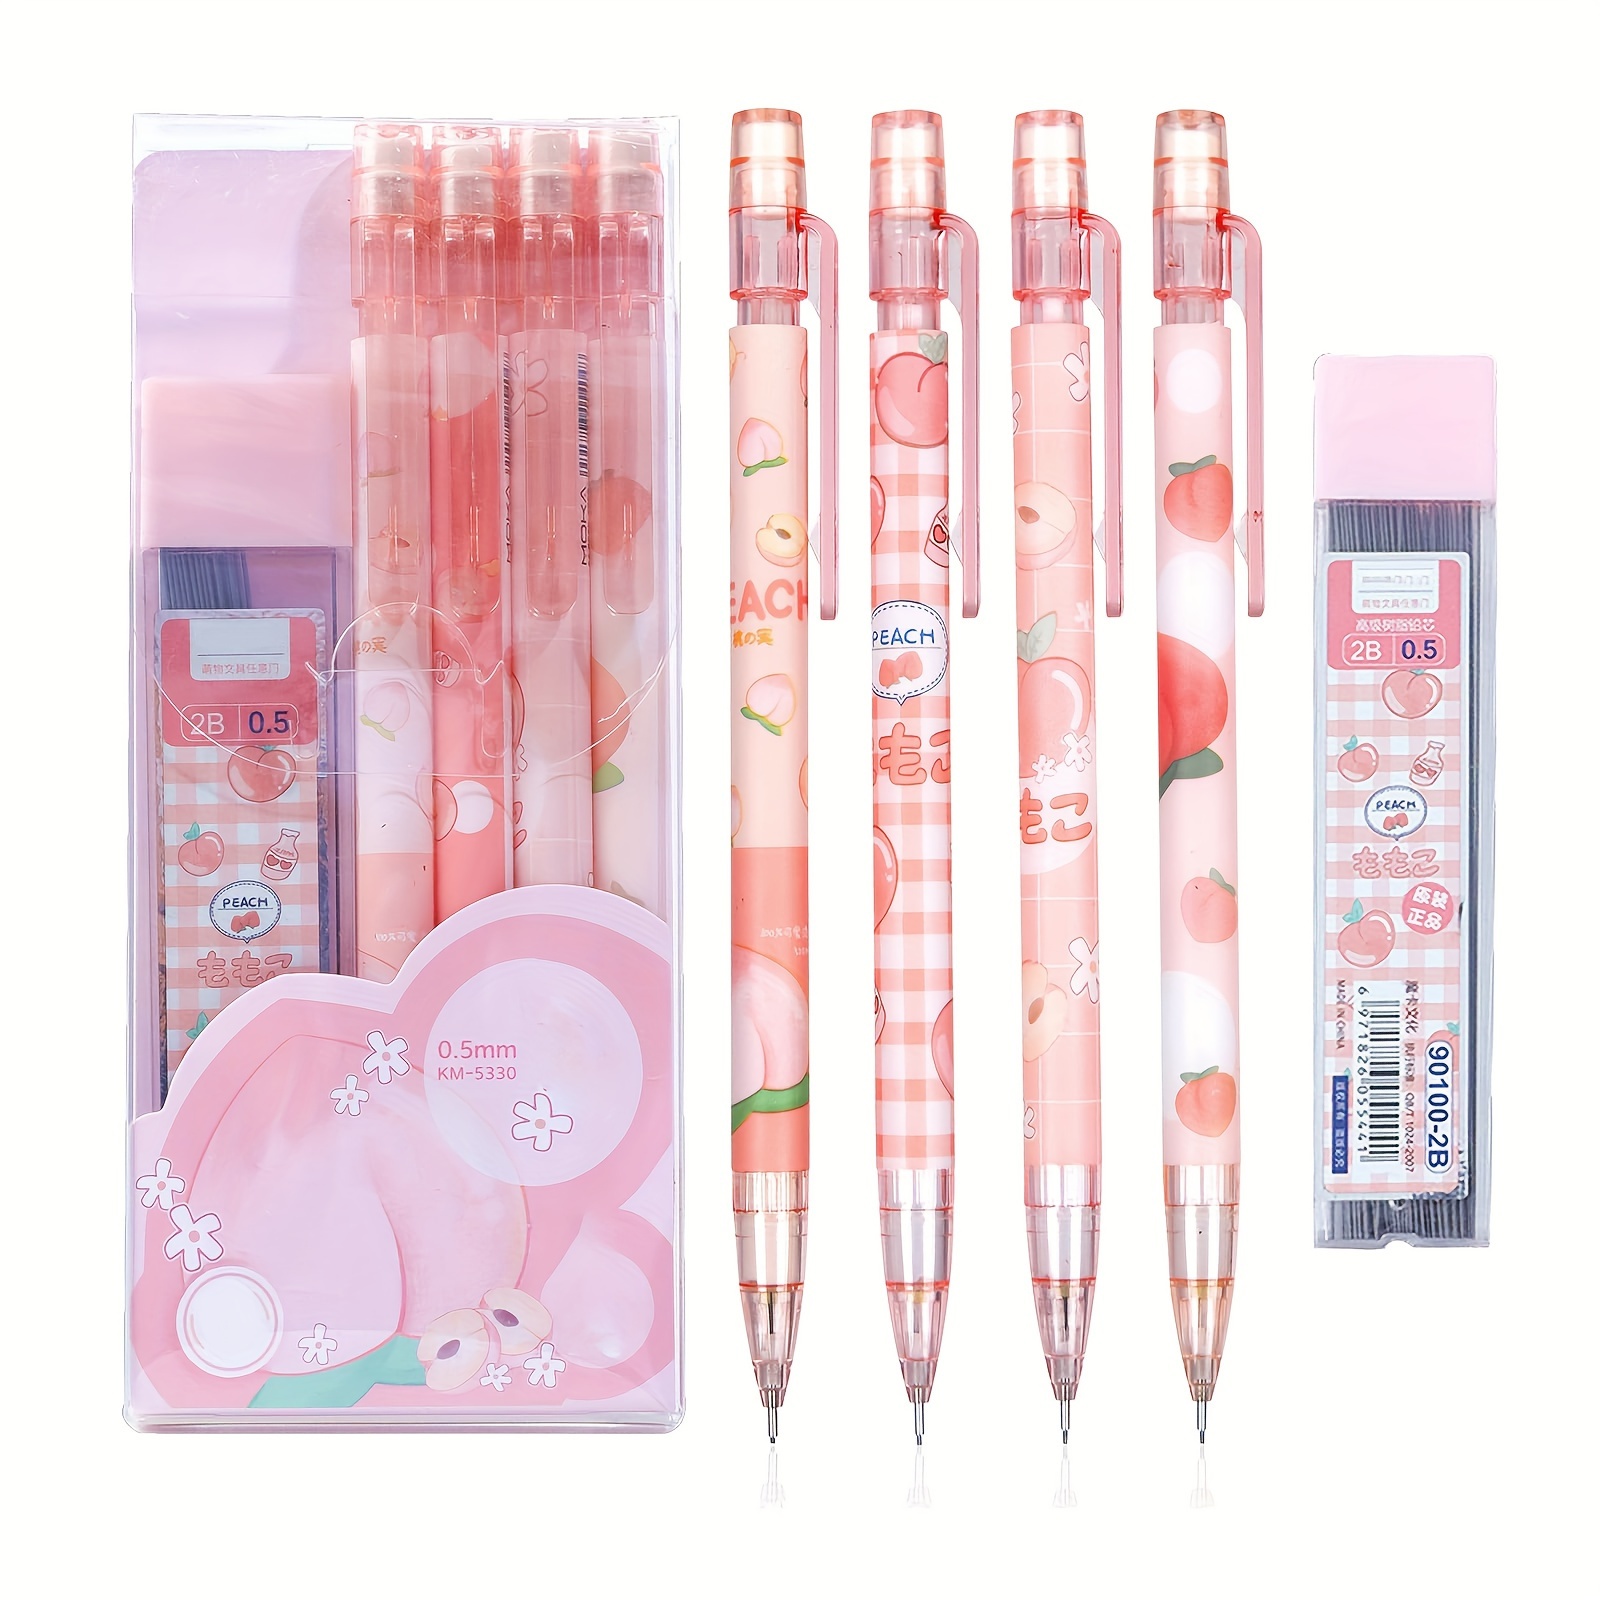 

Cute Mechanical Pencil Set Include 4pcs 0.5mm Kawaii Mechanical Pencils With 1 Tubes Hb Lead Refills, Kawaii Stationary, Cute Office School Supplies For Writing, Drawing, Sketching